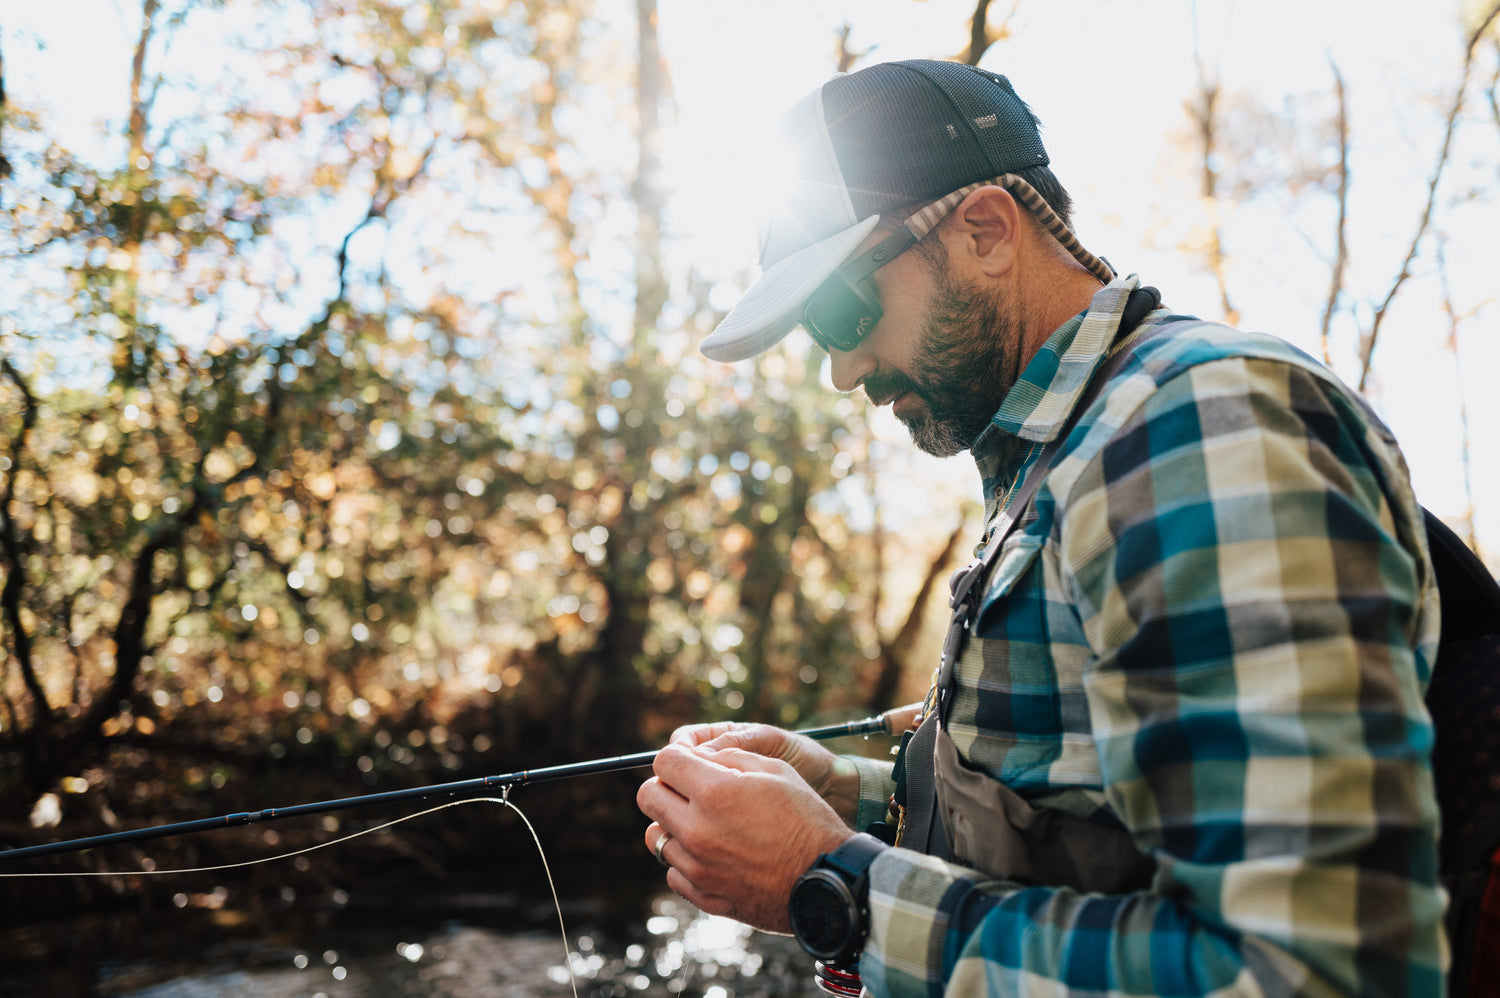 Fly Fishing Streamers 201: Strategies for Rigging, Casting, and Retrie